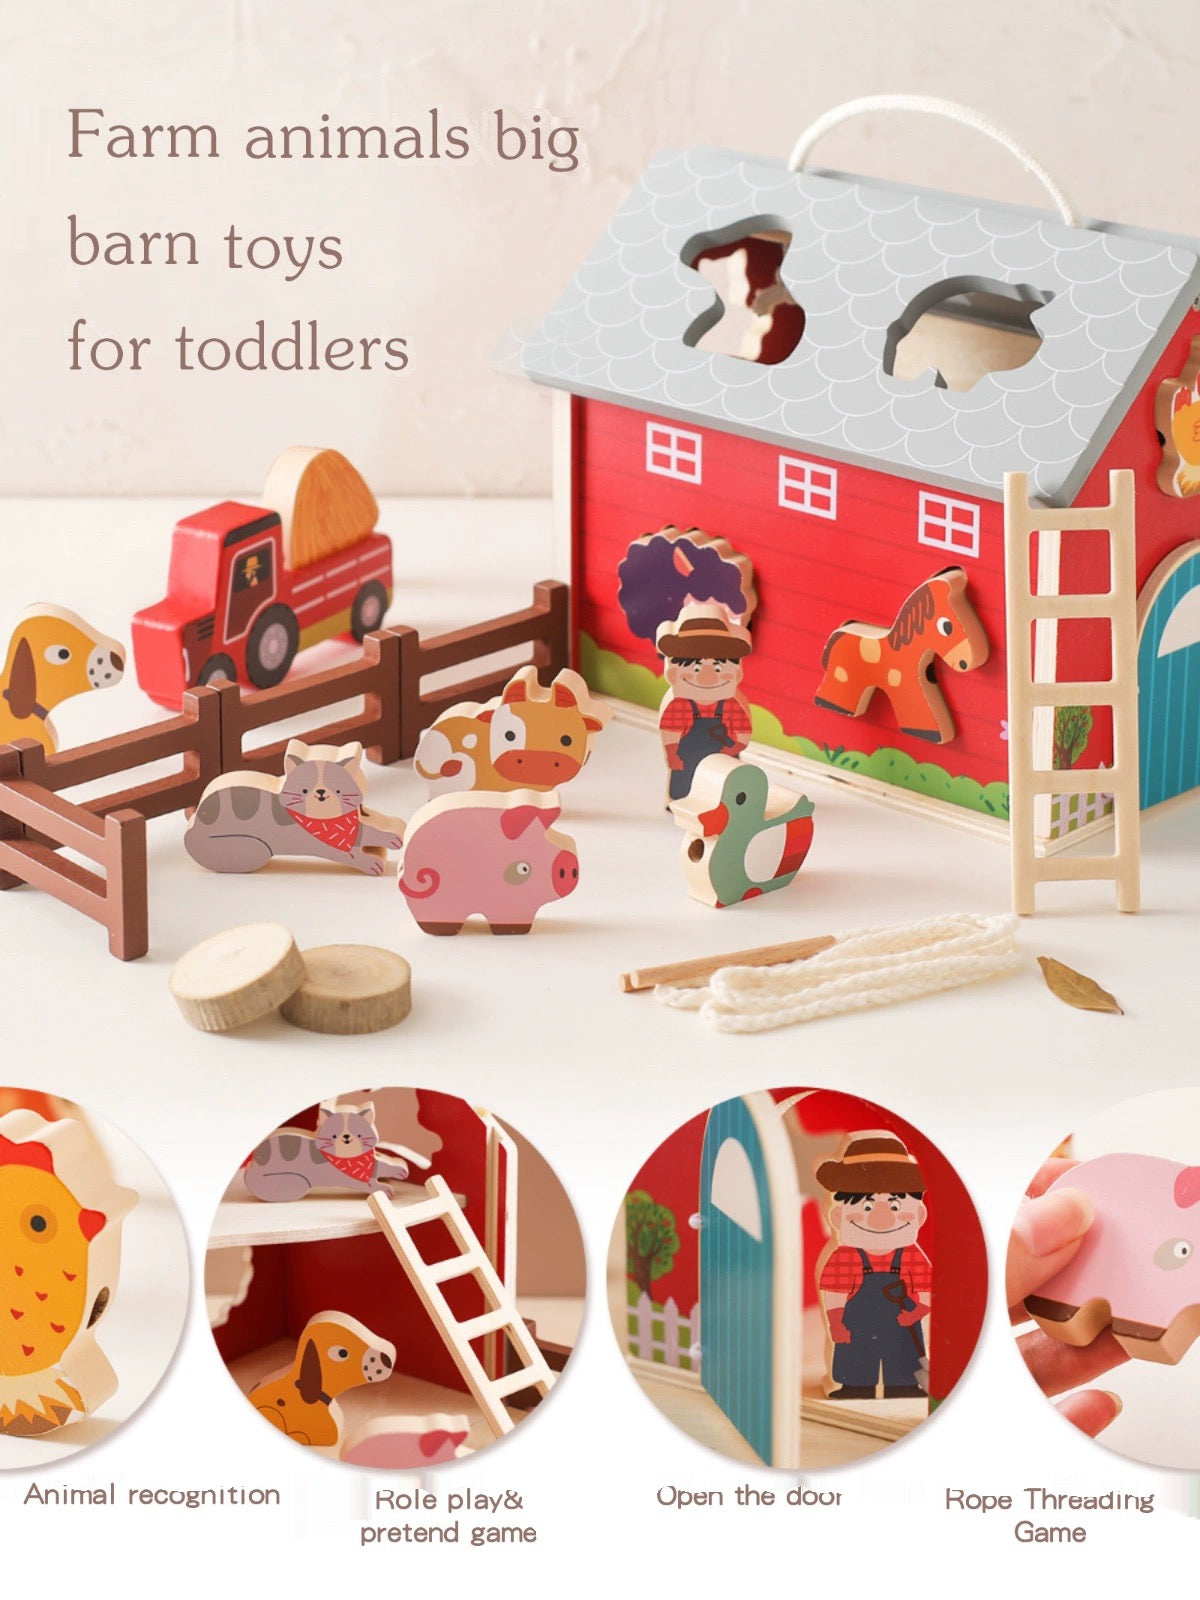 Wooden Barn House (with lacing toys)